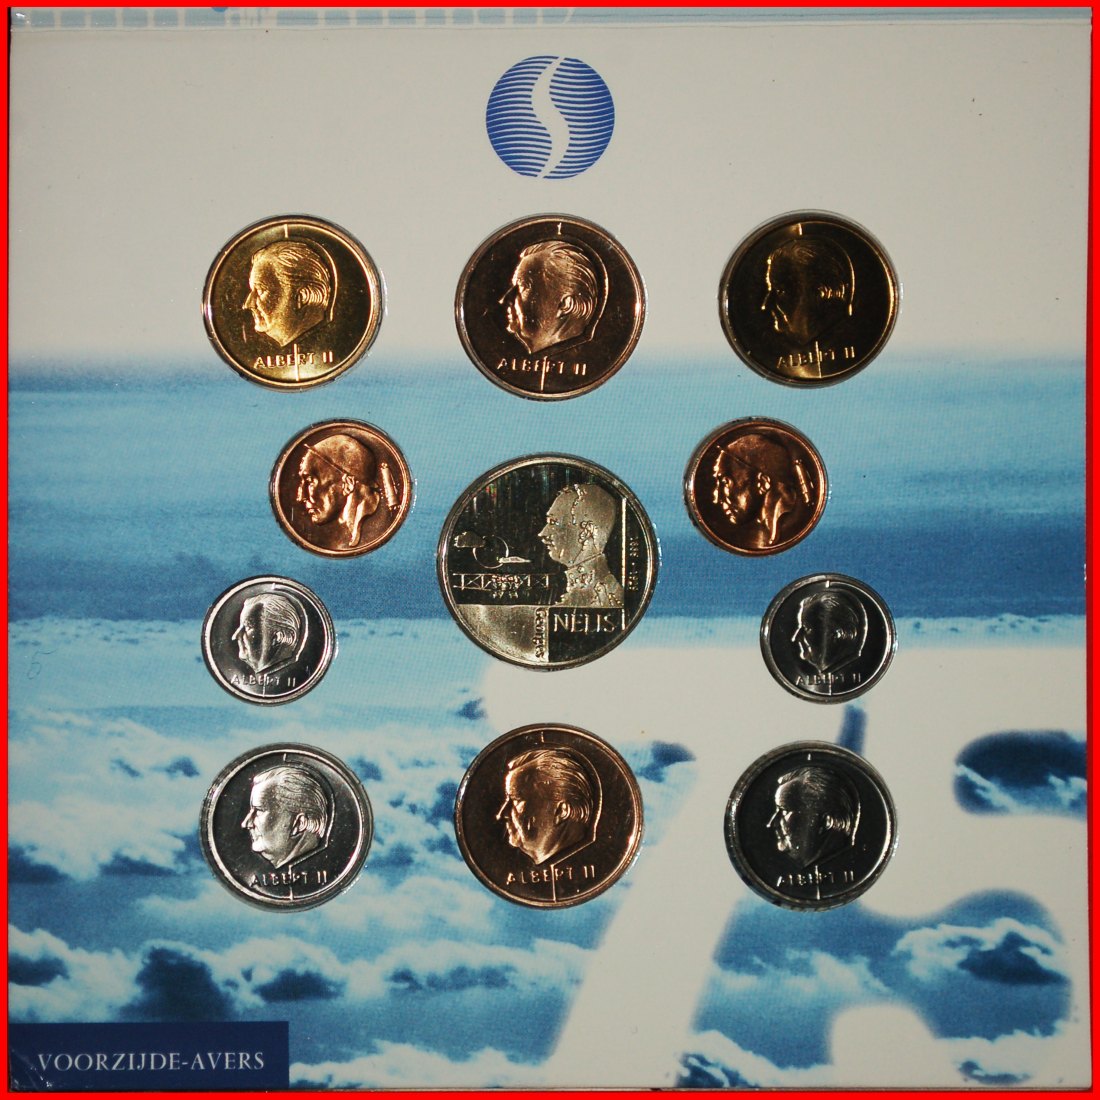  * PLANE 1923 - SWITZERLAND 1995: BELGIUM ★ MINT SET 1998 10 COINS WITH MEDAL★LOW START ★ NO RESERVE!   